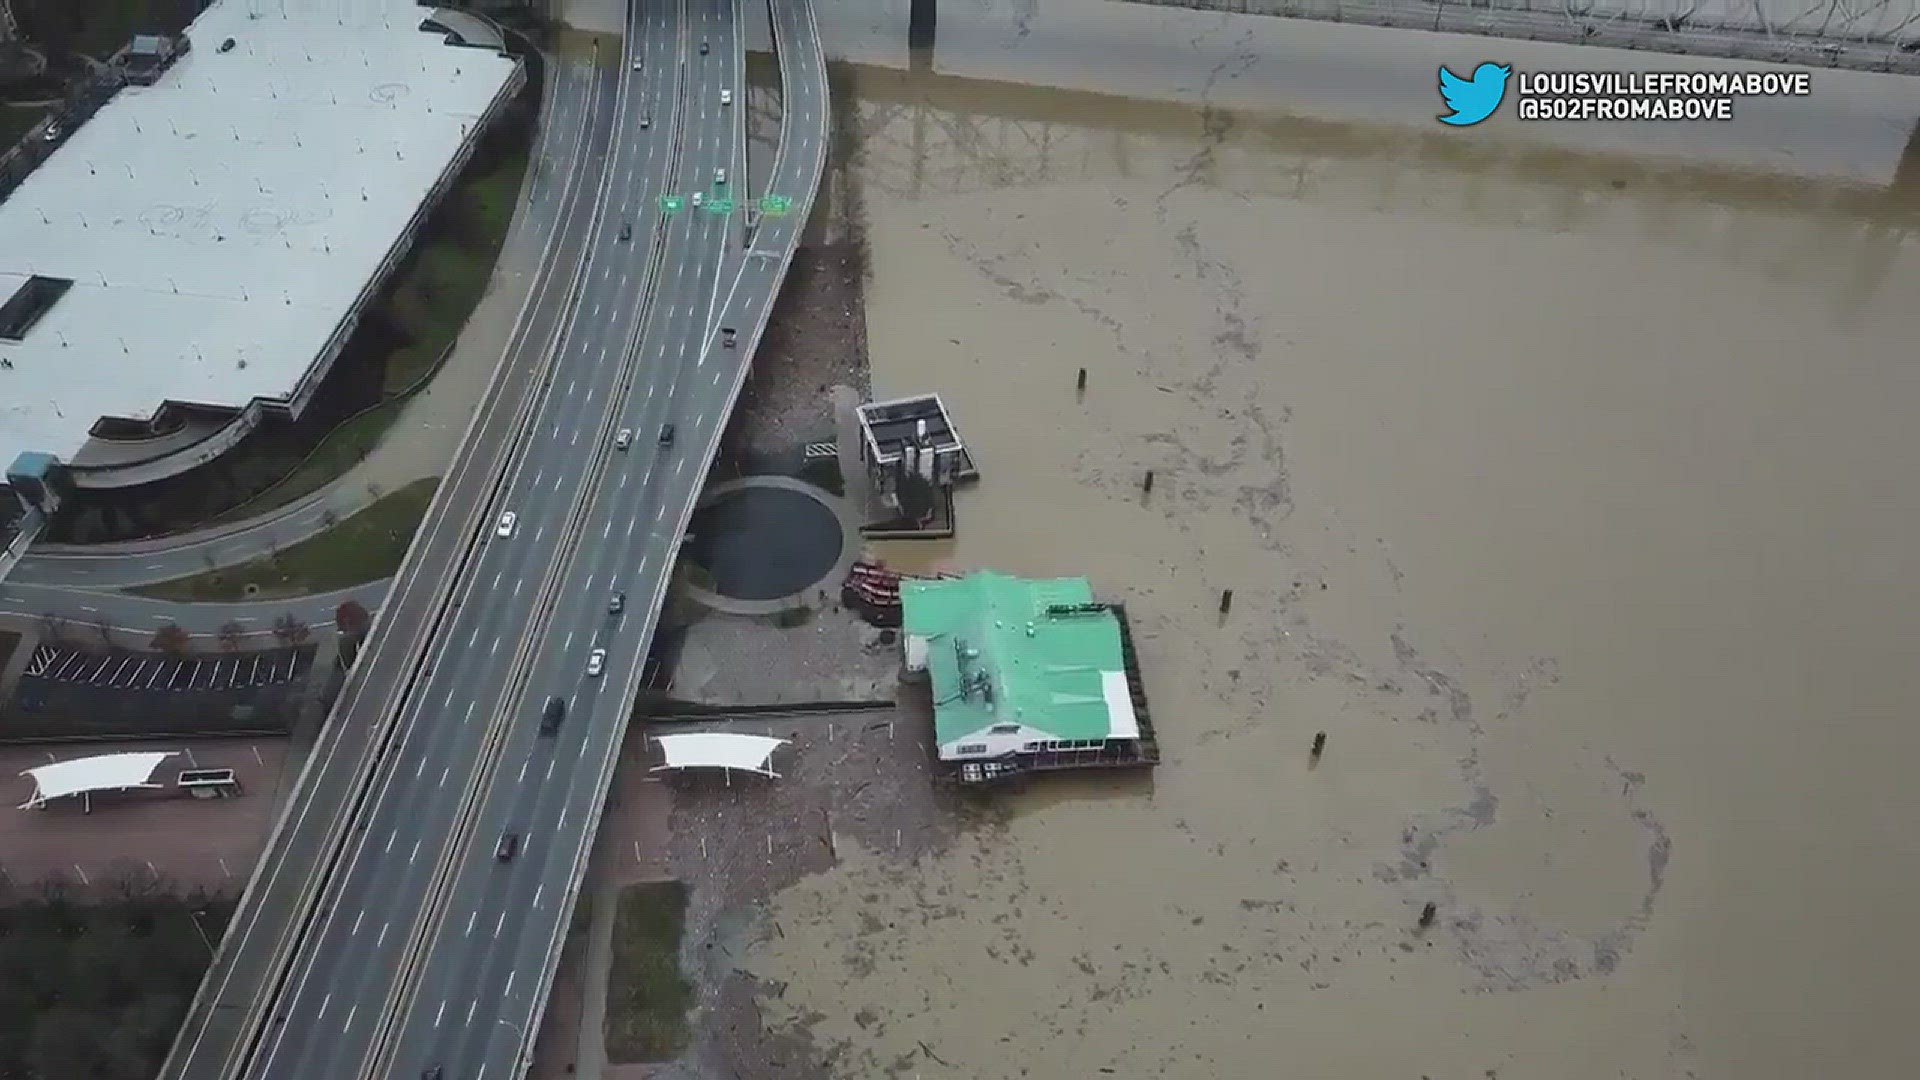 Twitter user @502fromabove captured amazing video of the Ohio River flooding that has impacted Kentuckiana.